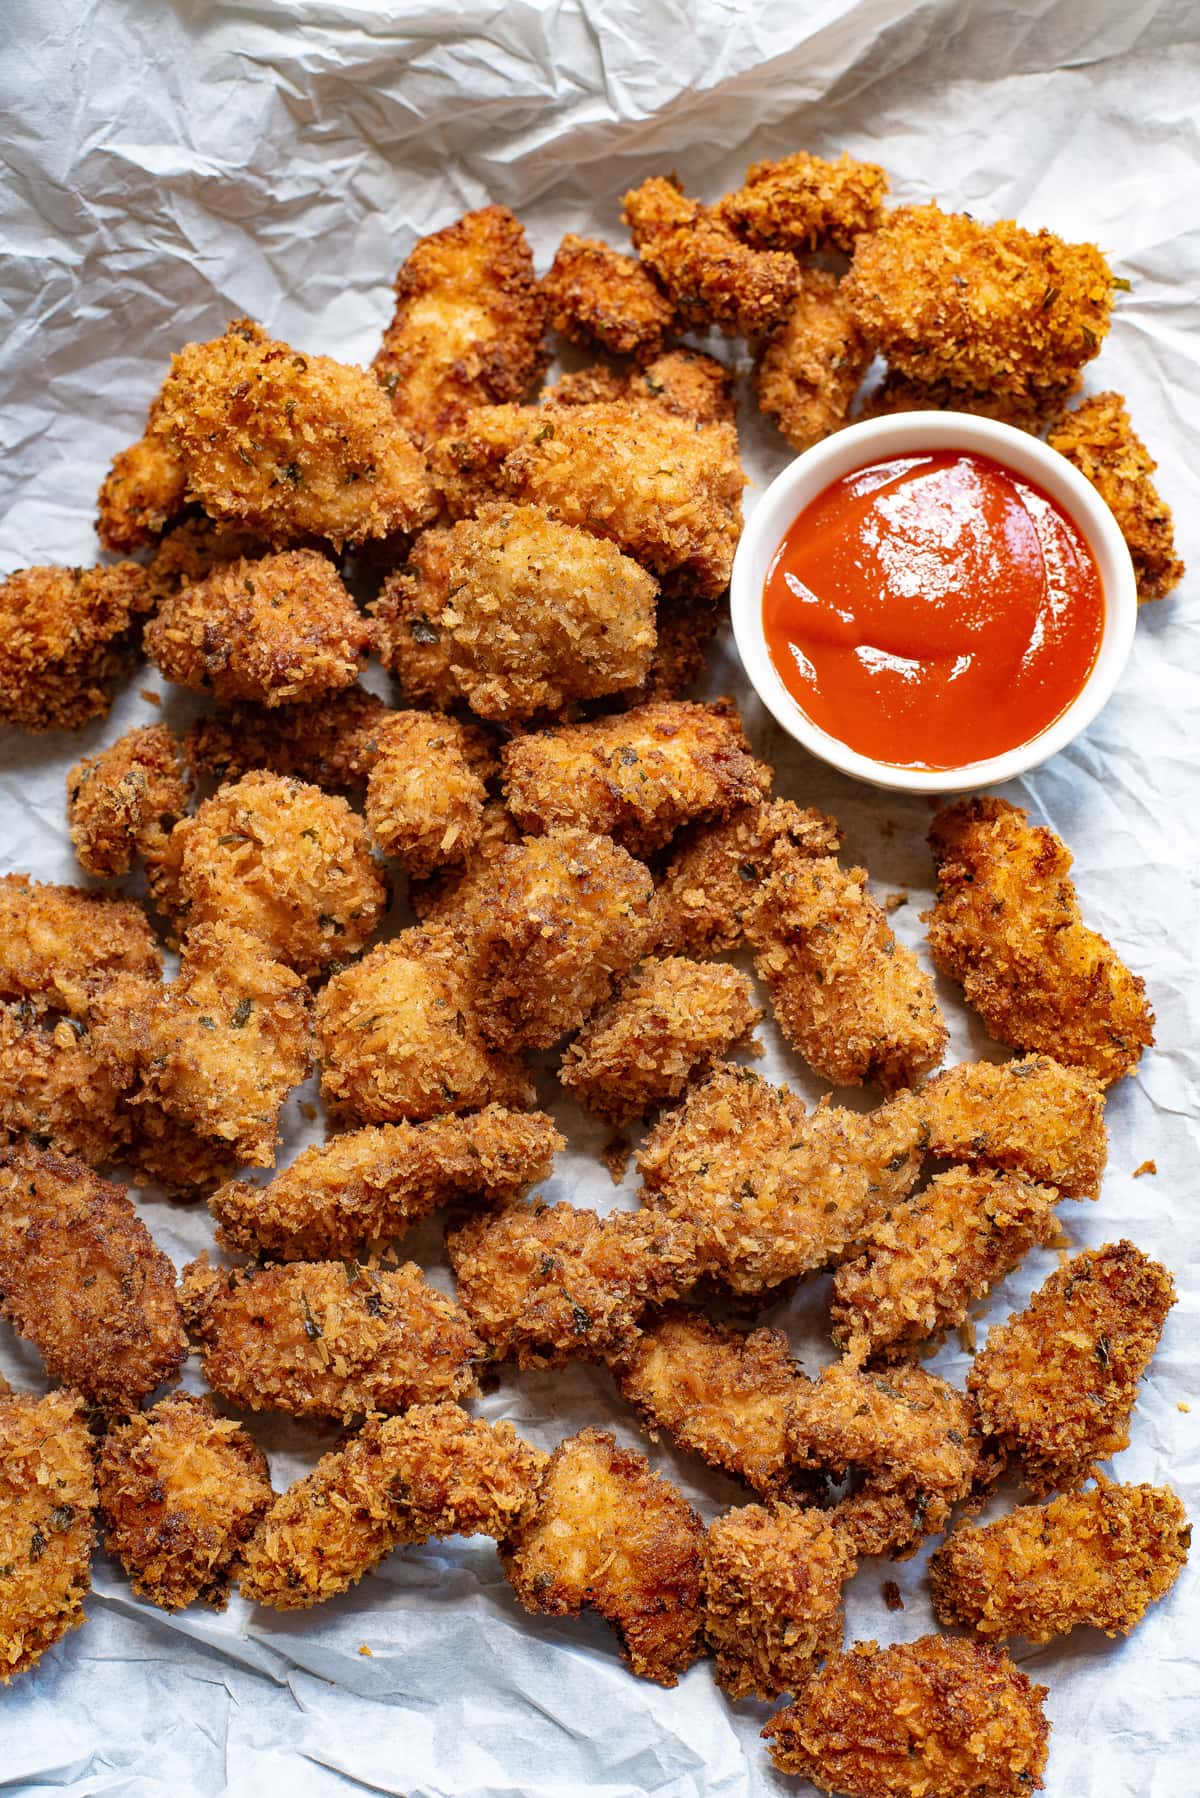 Overhead view of popcorn chicken with a dish of ketchup